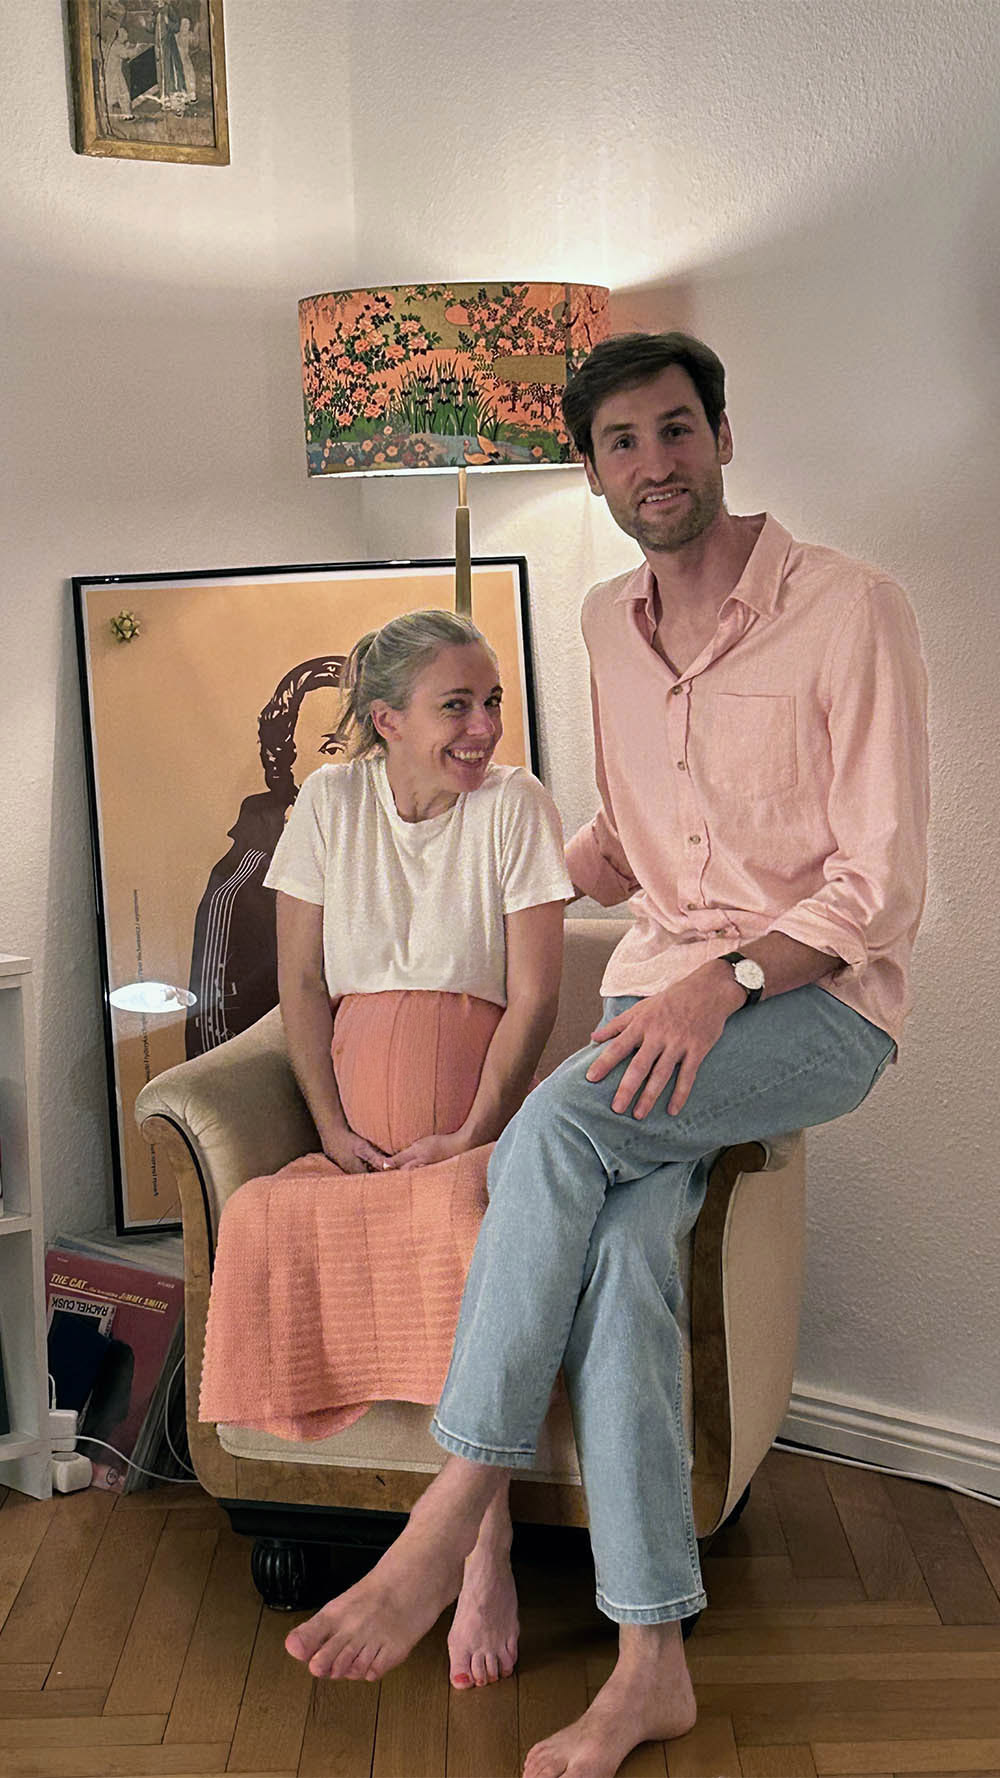 Pregnant woman siting next to a man, both smiling